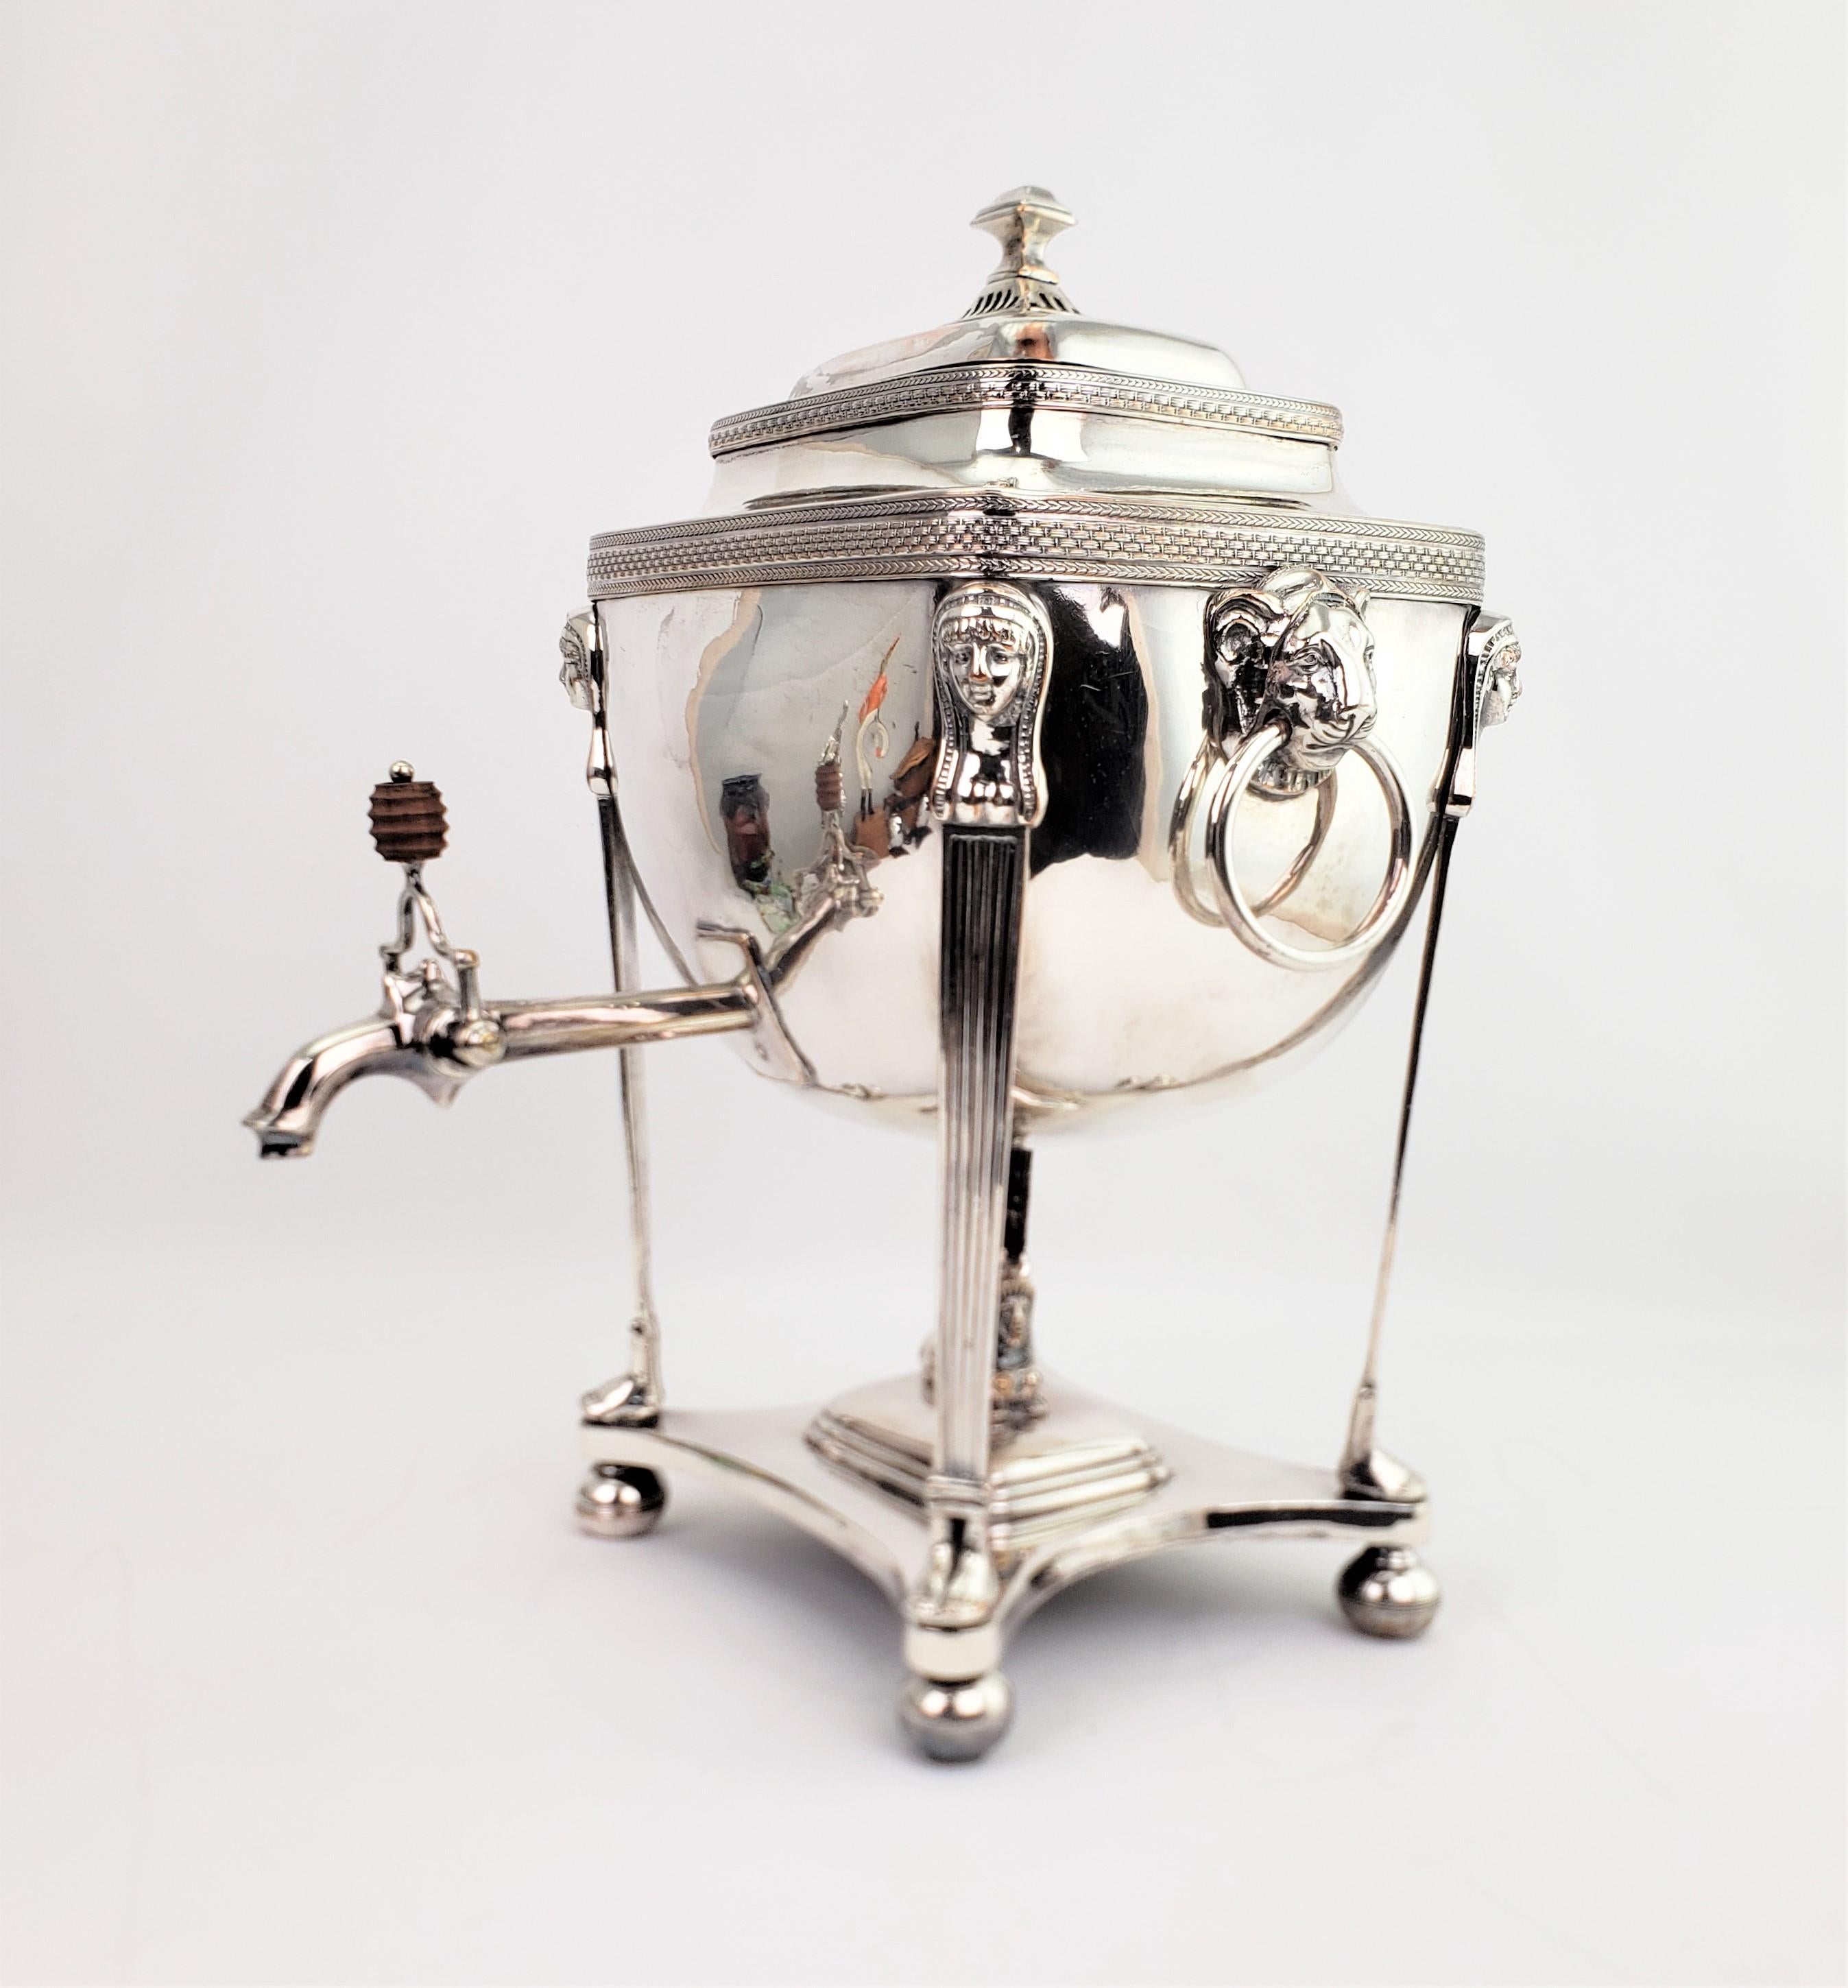 Machine-Made Antique Old Sheffield Silver Plated Hot Water Server with Egyptian Revival Decor